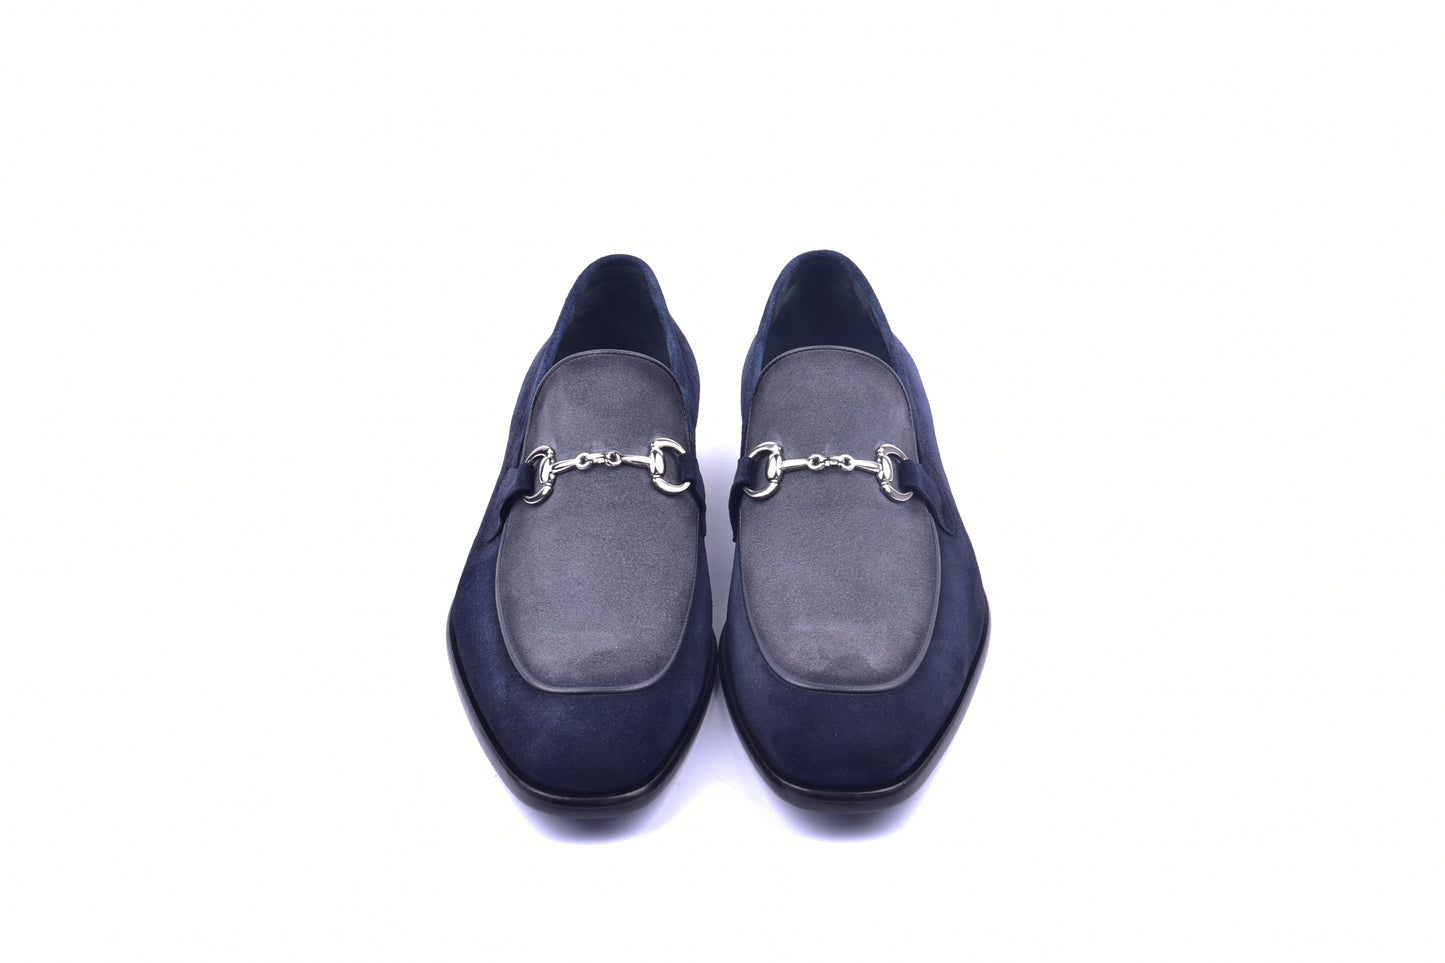 C11107-6376S Two Tone Suede Bit Loafer- Navy Blue